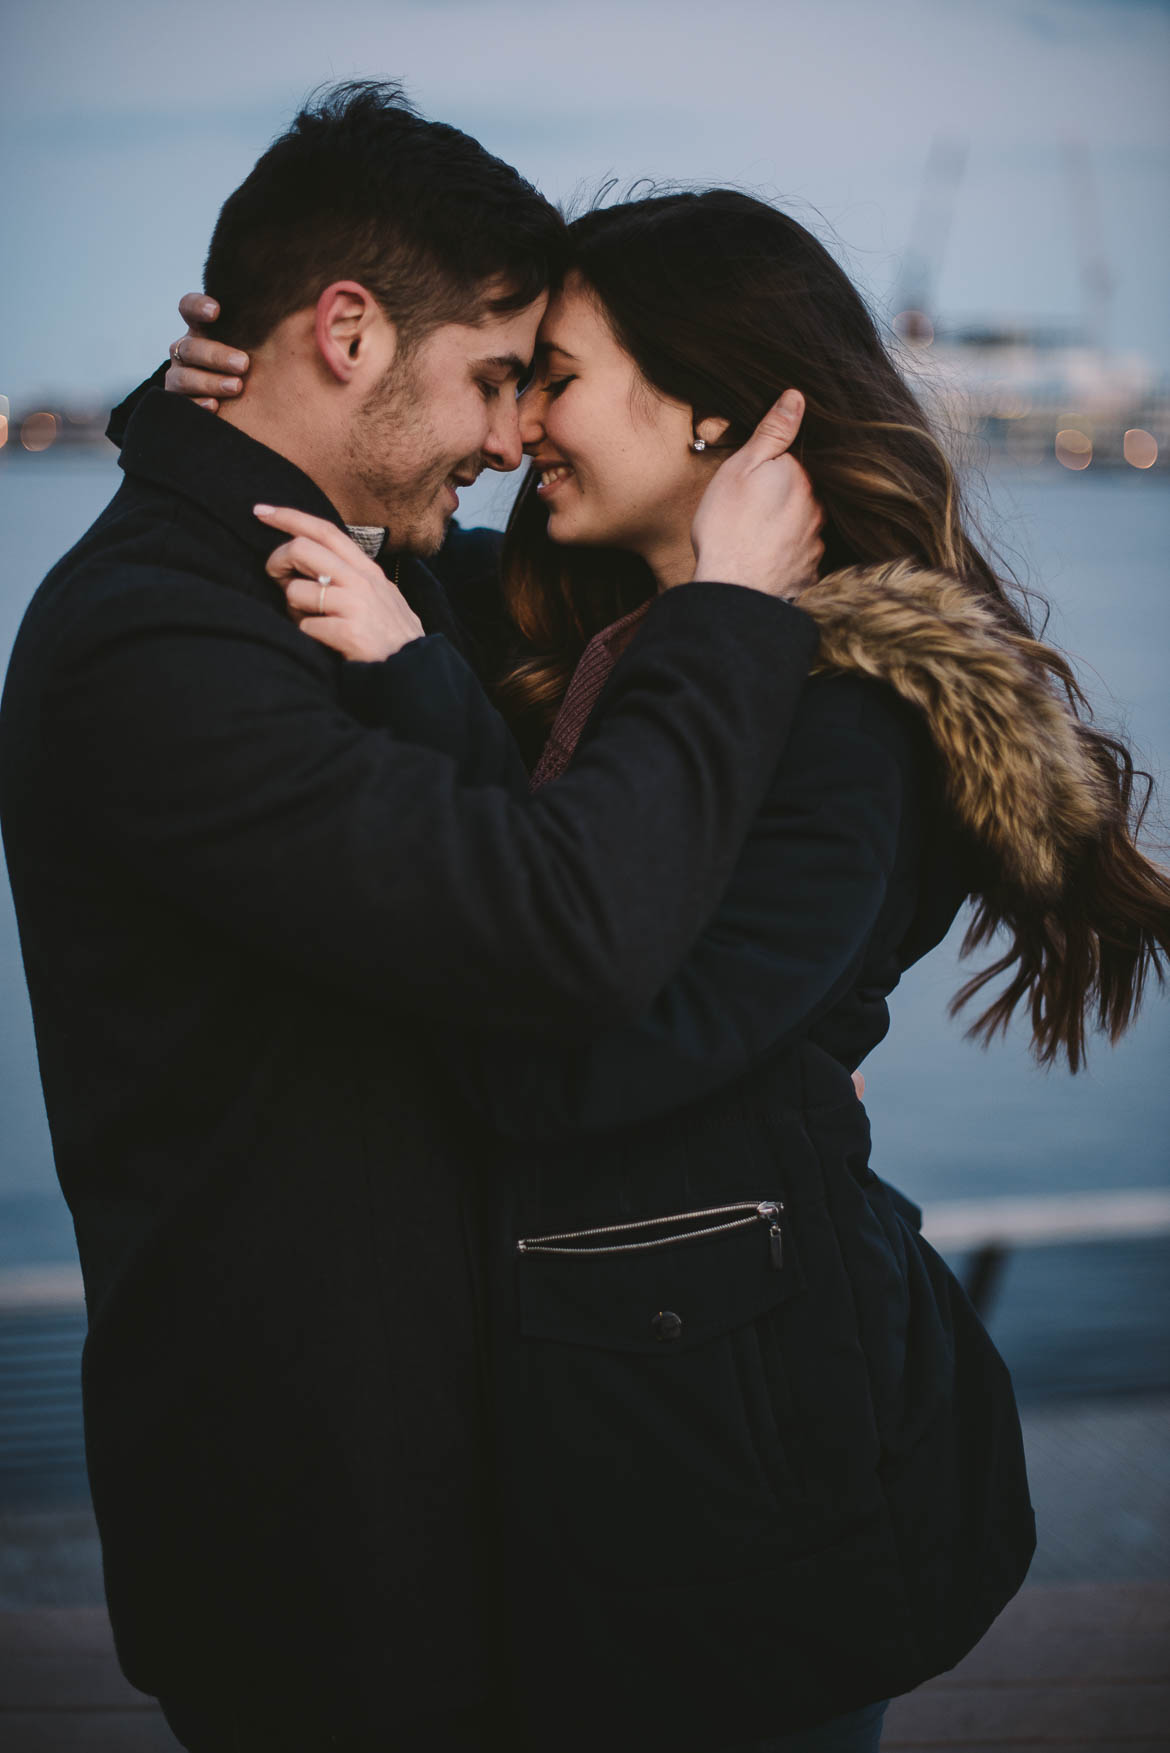 Engagement session photography Travel